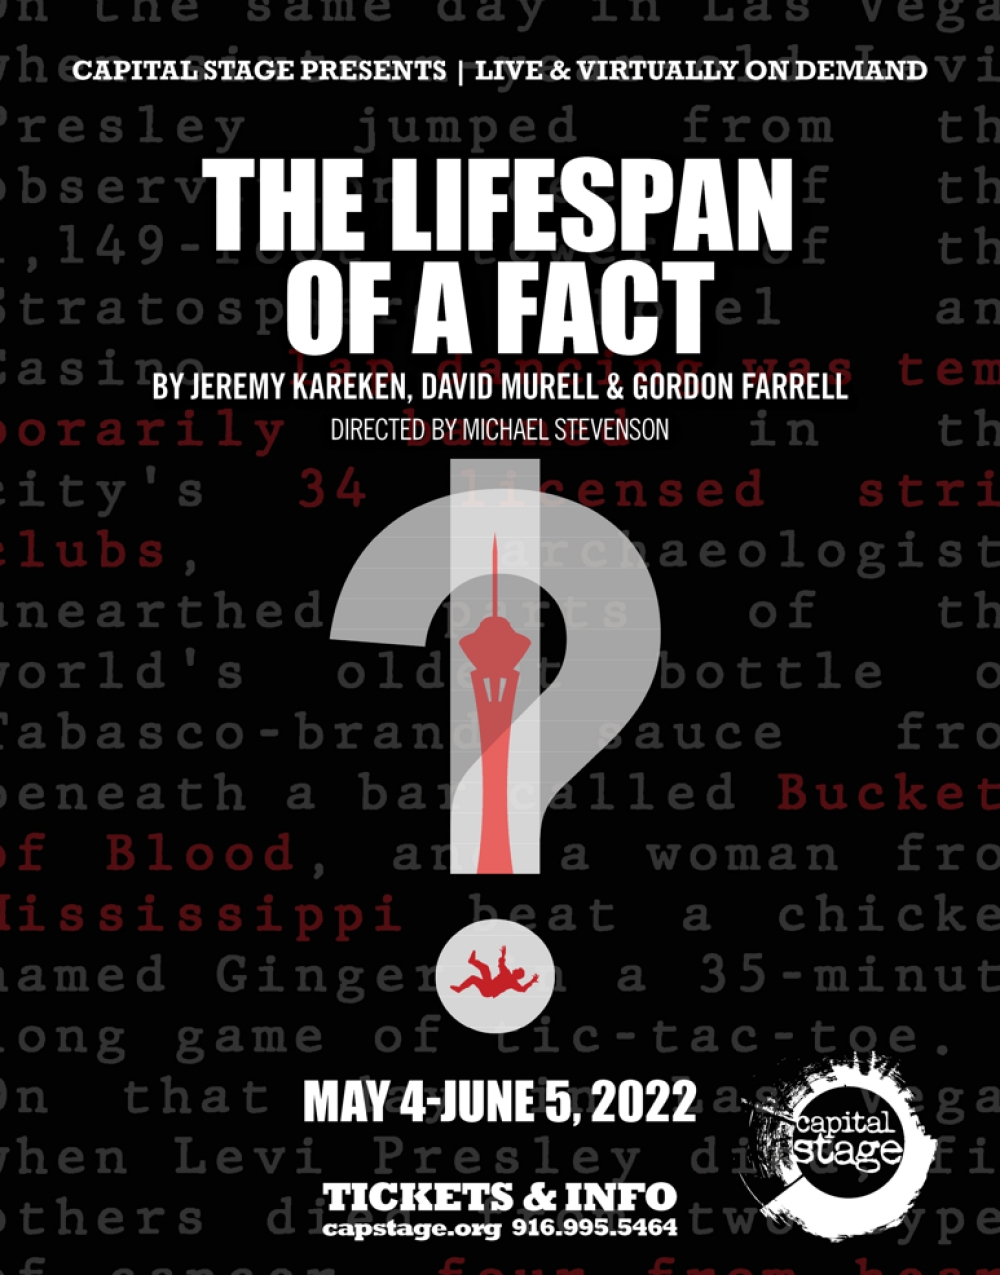 The Lifespan Of A Fact at Capital Stage